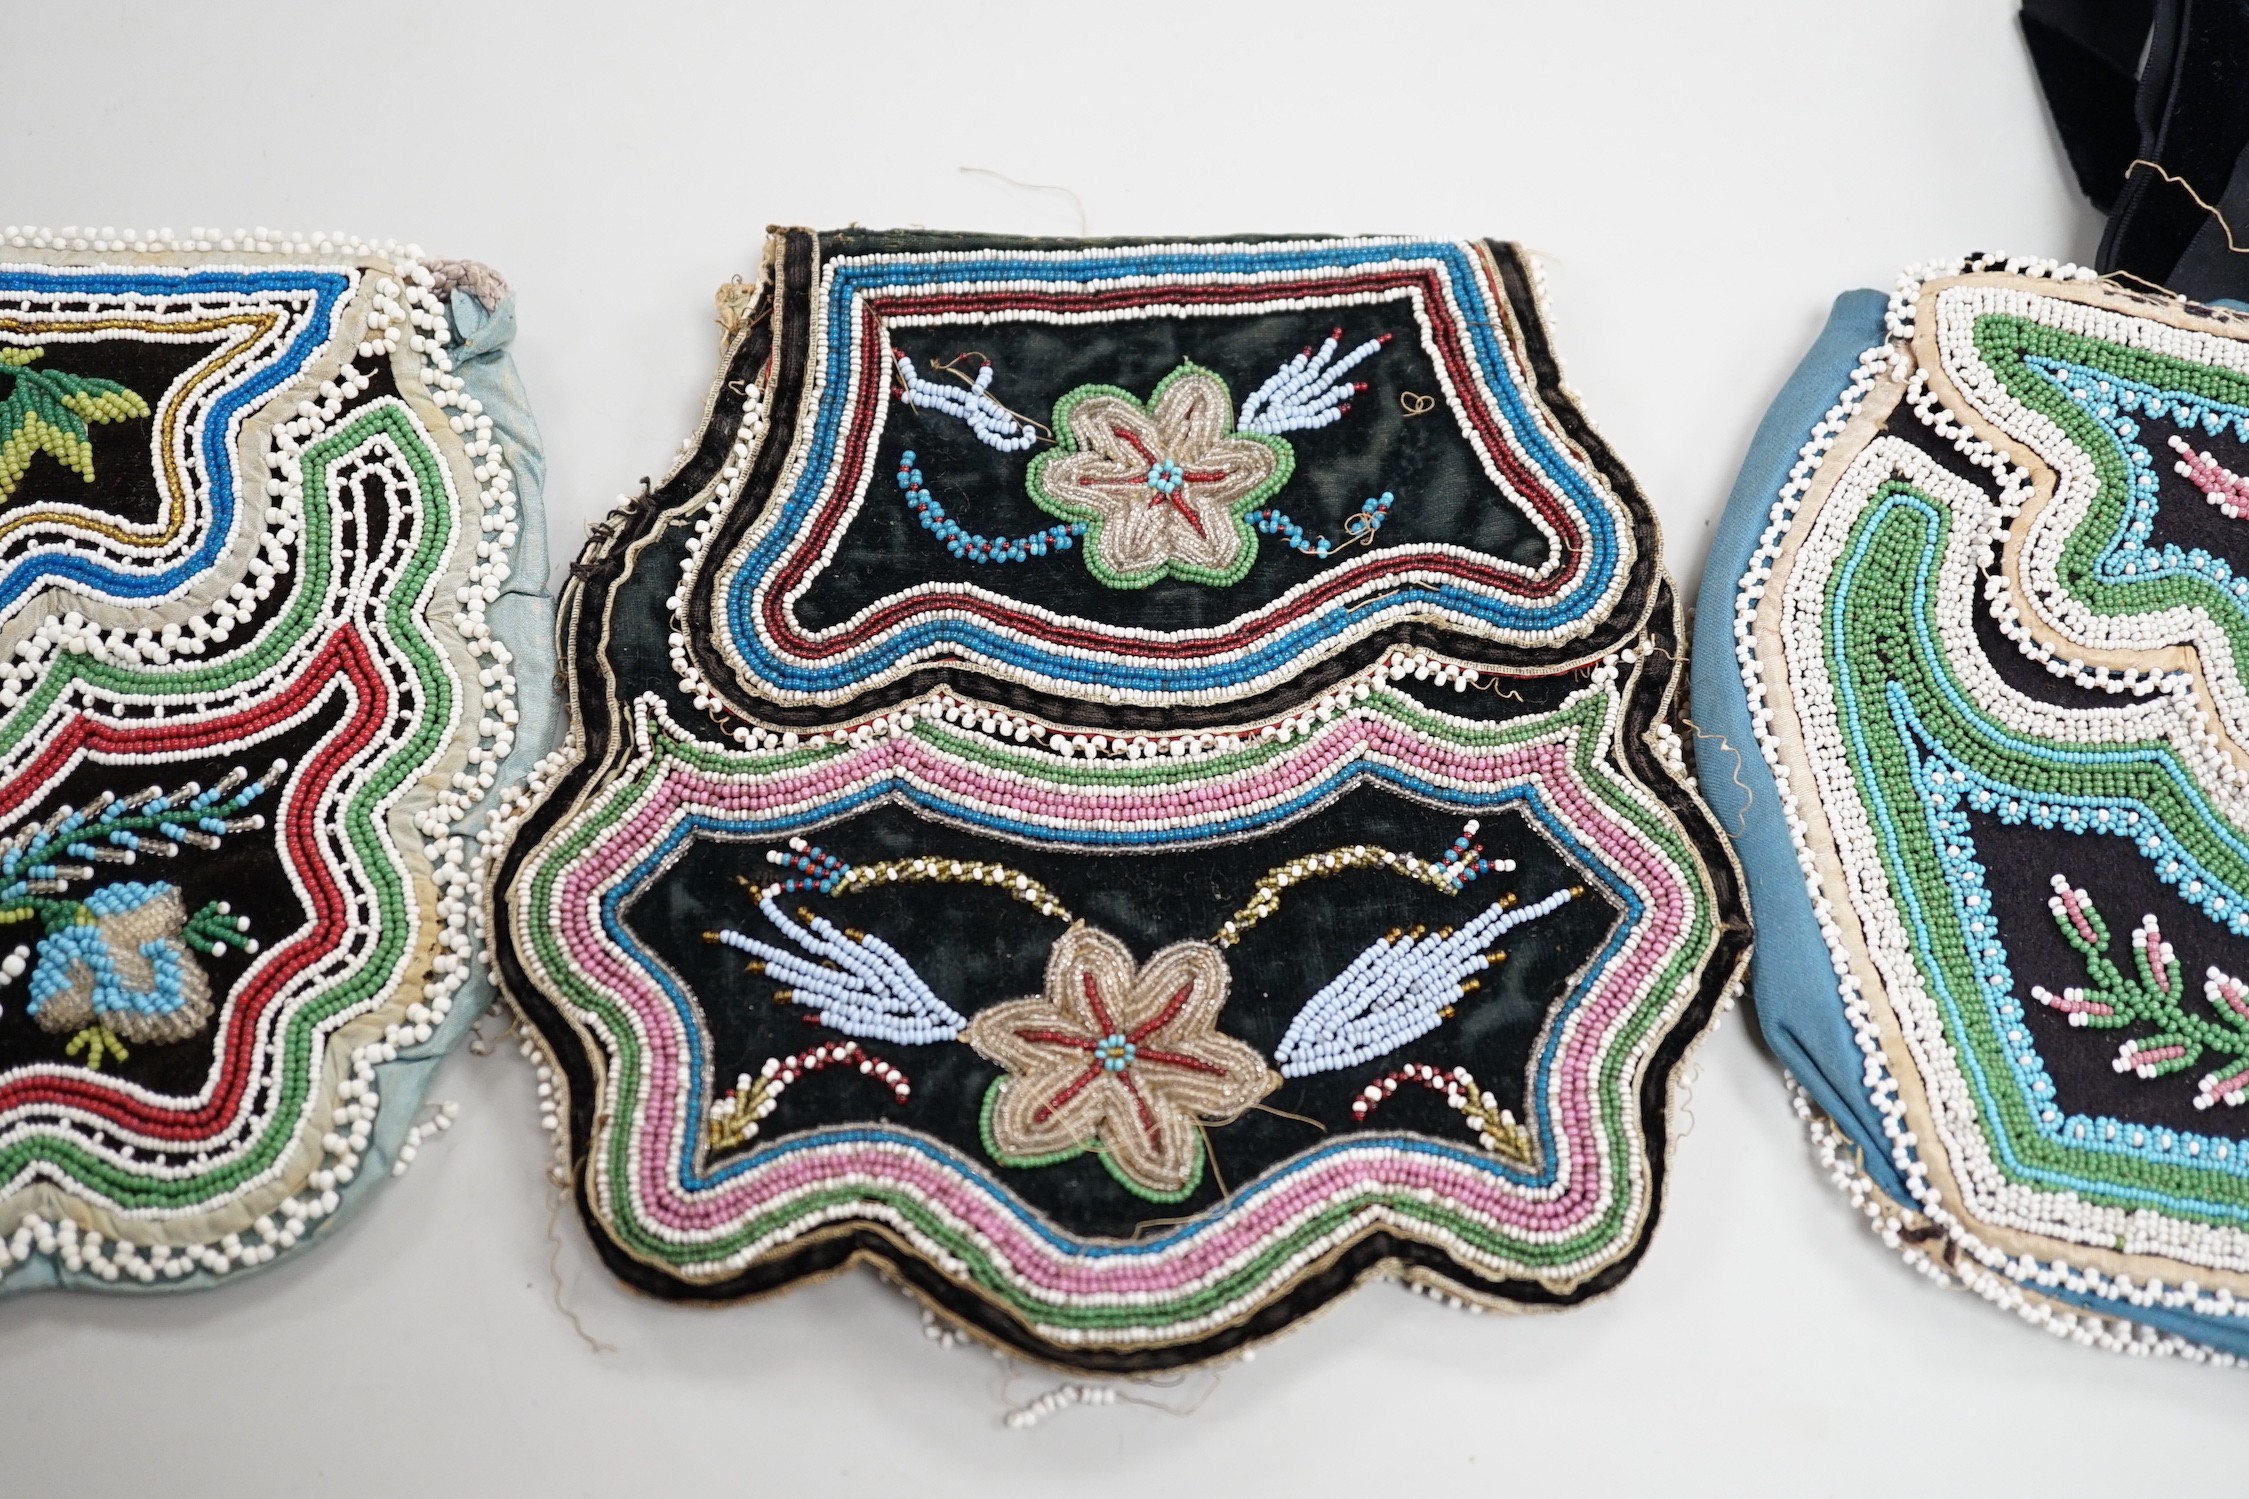 Three mid to late 19th century, Haudenosaunee (Iroquois) Grand River Reserve, native North American/Canadian fine glass beadwork and silk bags